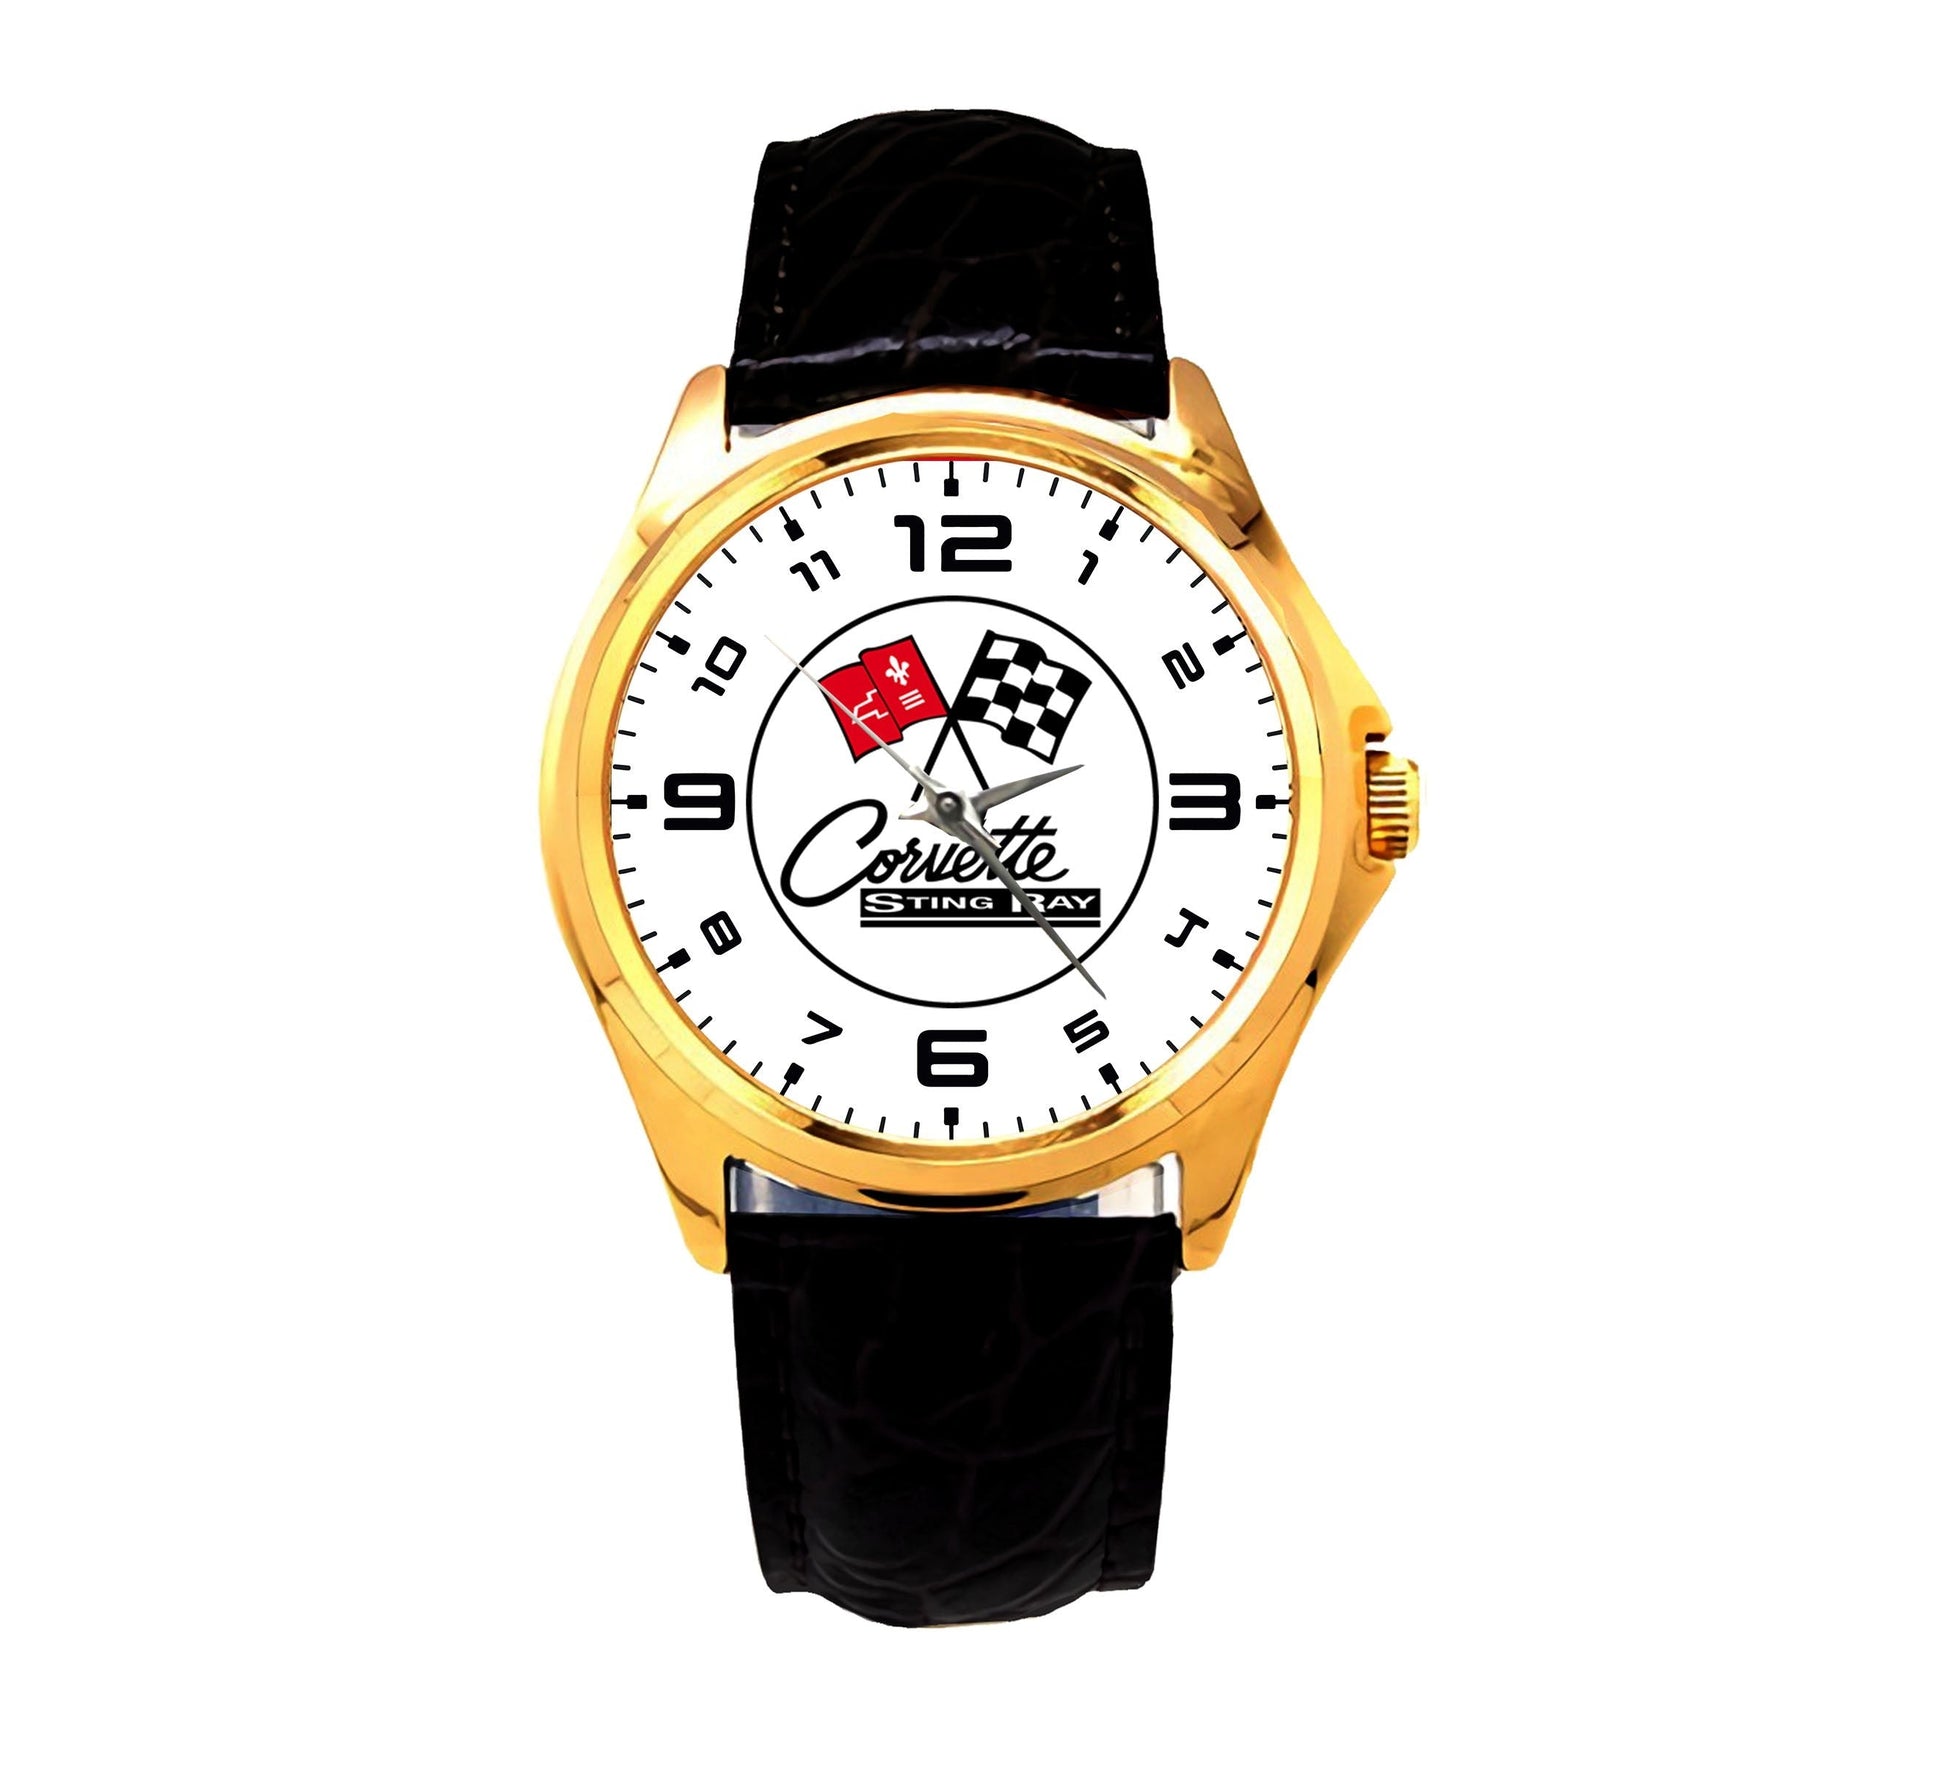 Corvette Sting Ray Watches Bdk46-A11